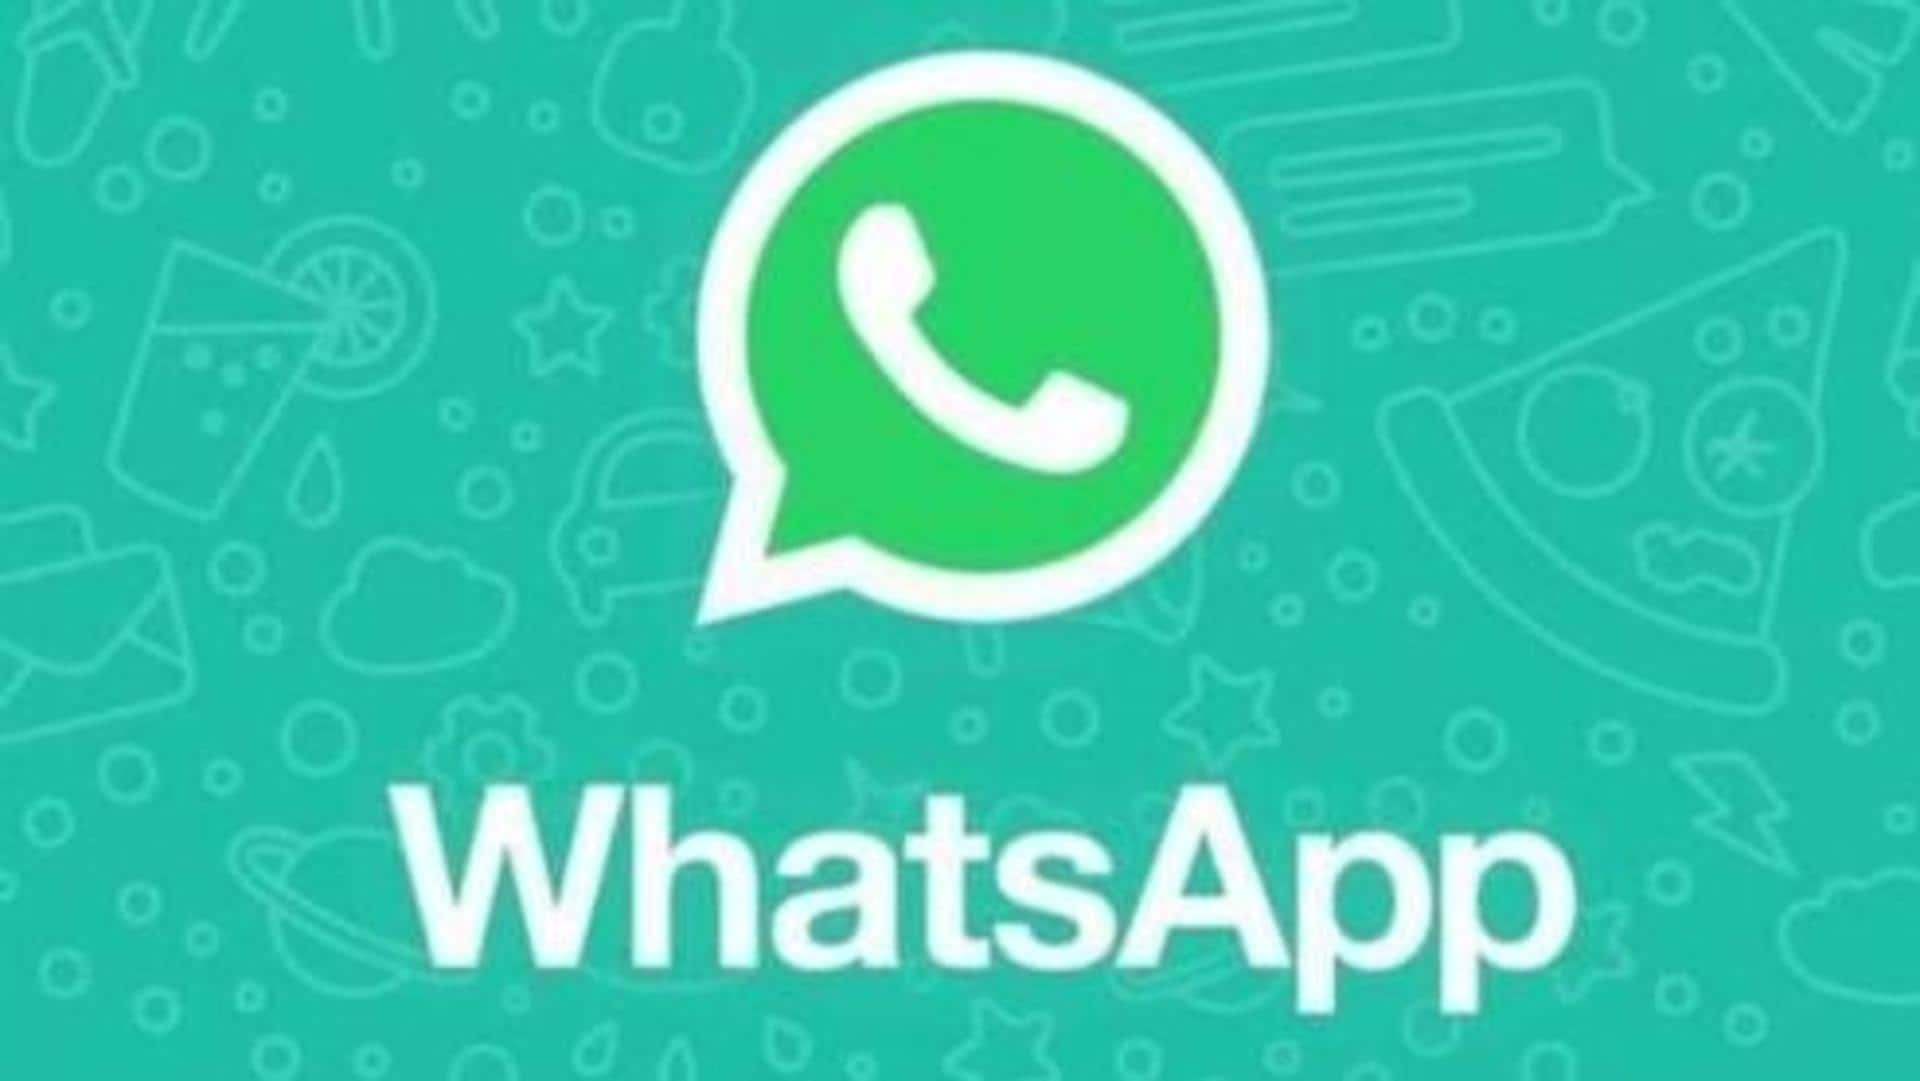 WhatsApp is now rolling out polls feature to Desktop client